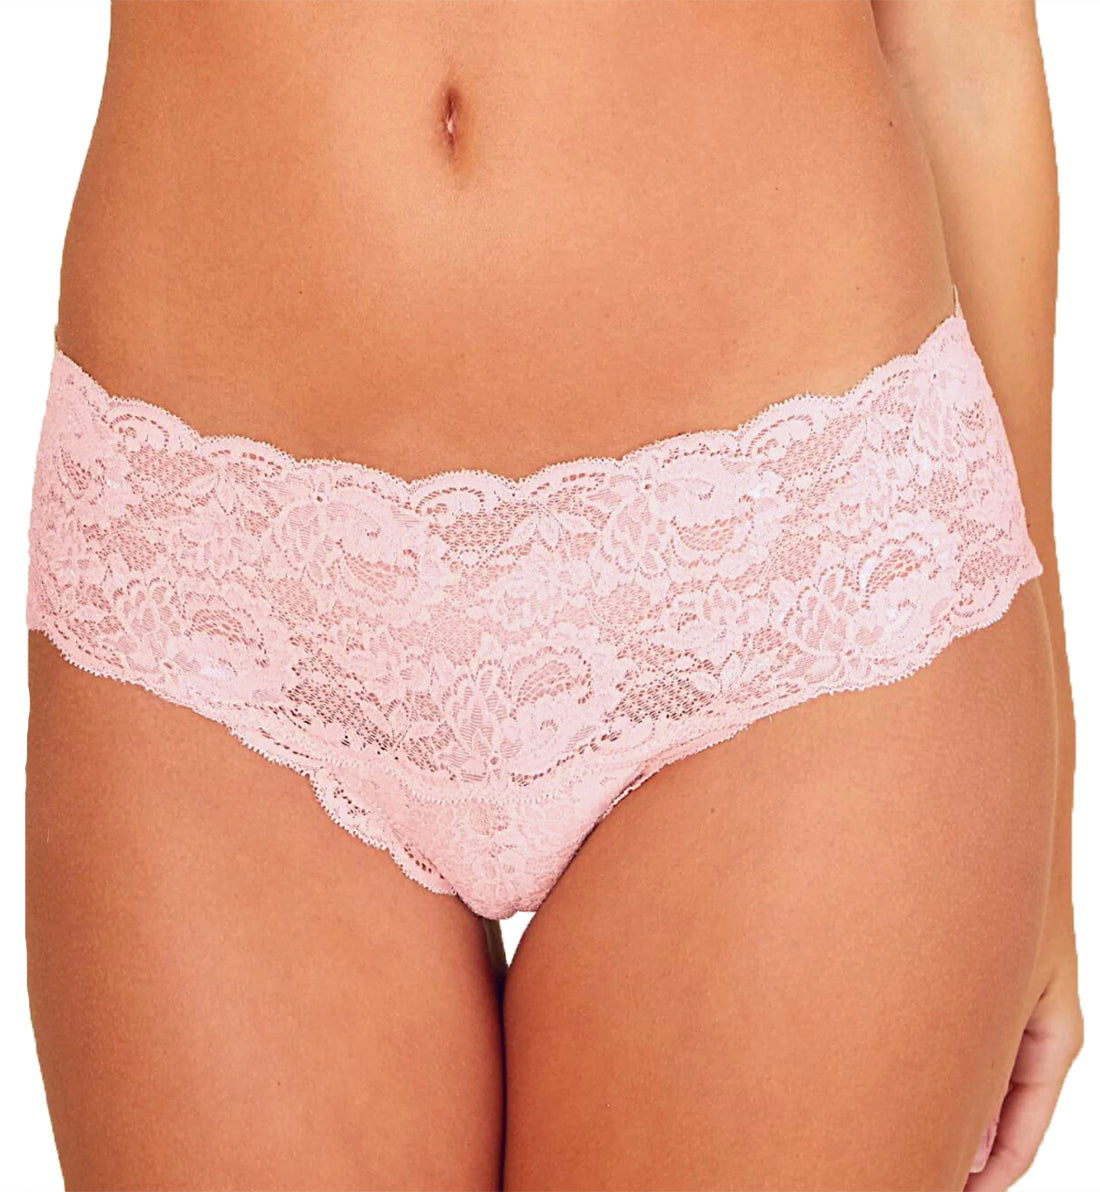 Cosabella Never Say Never Hottie Lowrider Hotpant (NEVER07ZL),S/M,Jaipur Pink - Jaipur Pink,S/M